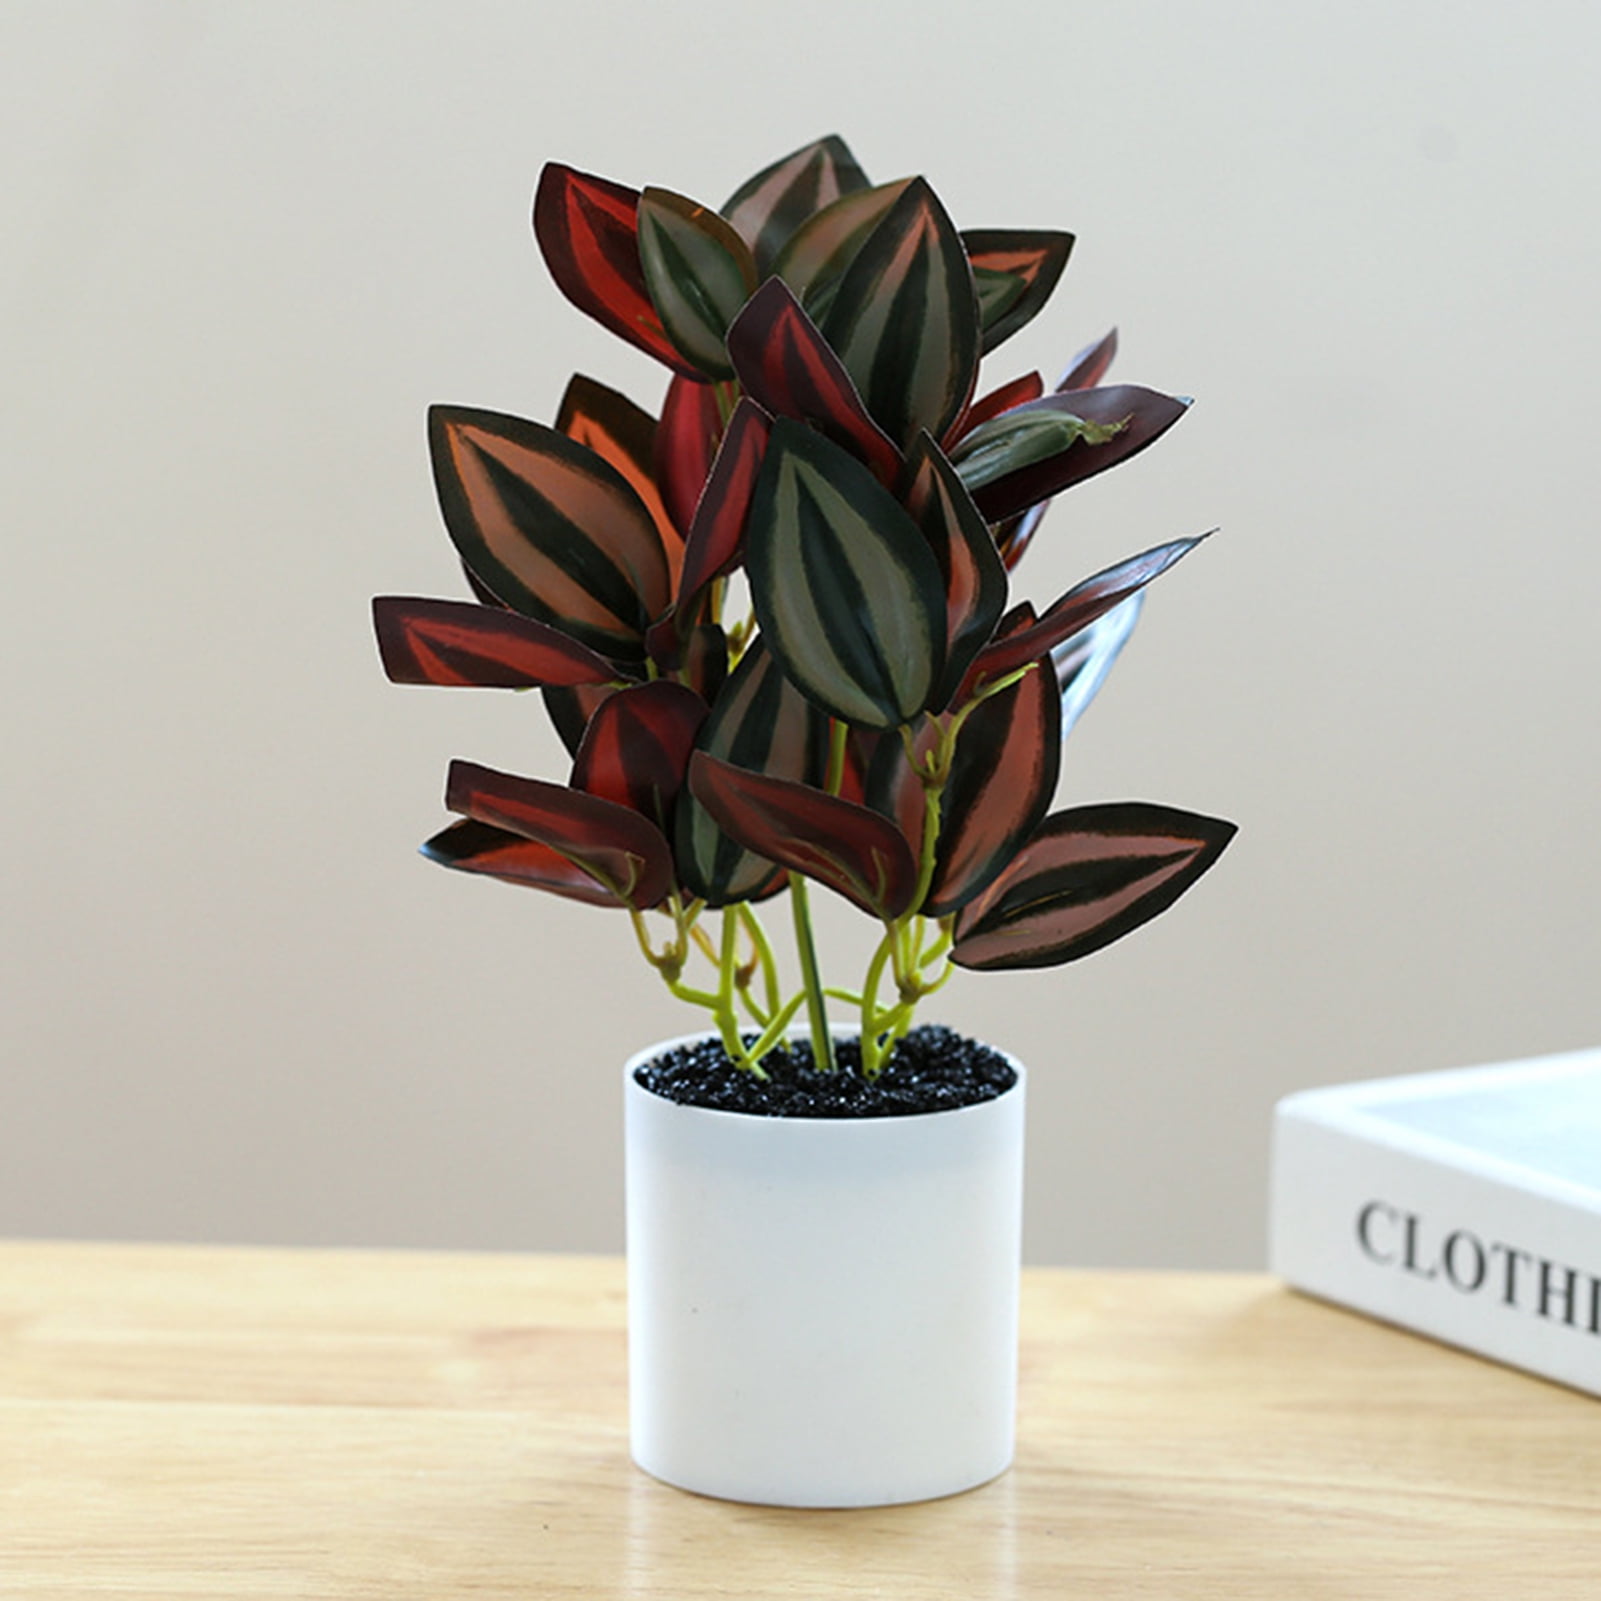 Hesroicy Simulation Pot Plant Realistic Looking Not Wither Geometric Shape  Potted Unfading Maintenance Free Decorate Exquisite Details Home Decor